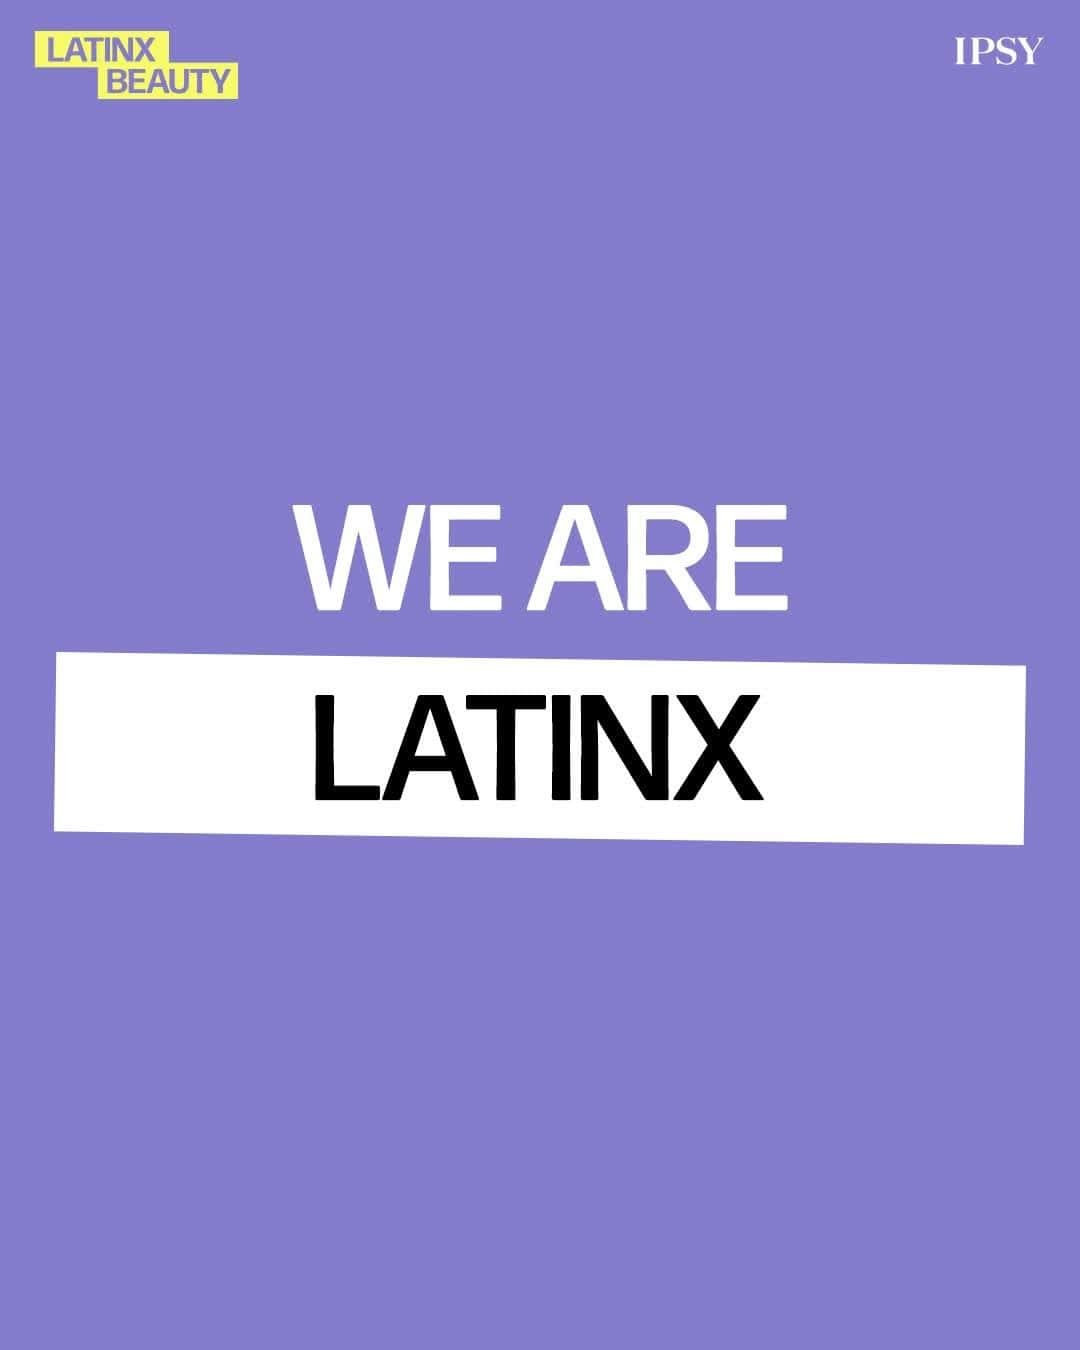 ipsyのインスタグラム：「In honor of #HispanicHeritageMonth, we’re paying tribute to Latinx creators, brands, entrepreneurs, achievements, and more.   First up? Some of our favorite Latinx-led beauty brands that are changing the game—from innovative skincare tools to one iconic makeup sponge we can’t live without. Tap the link in bio to meet 21 Latinx-founded and -owned beauty brands to love and shop (with some great promo codes!) now and forever.」